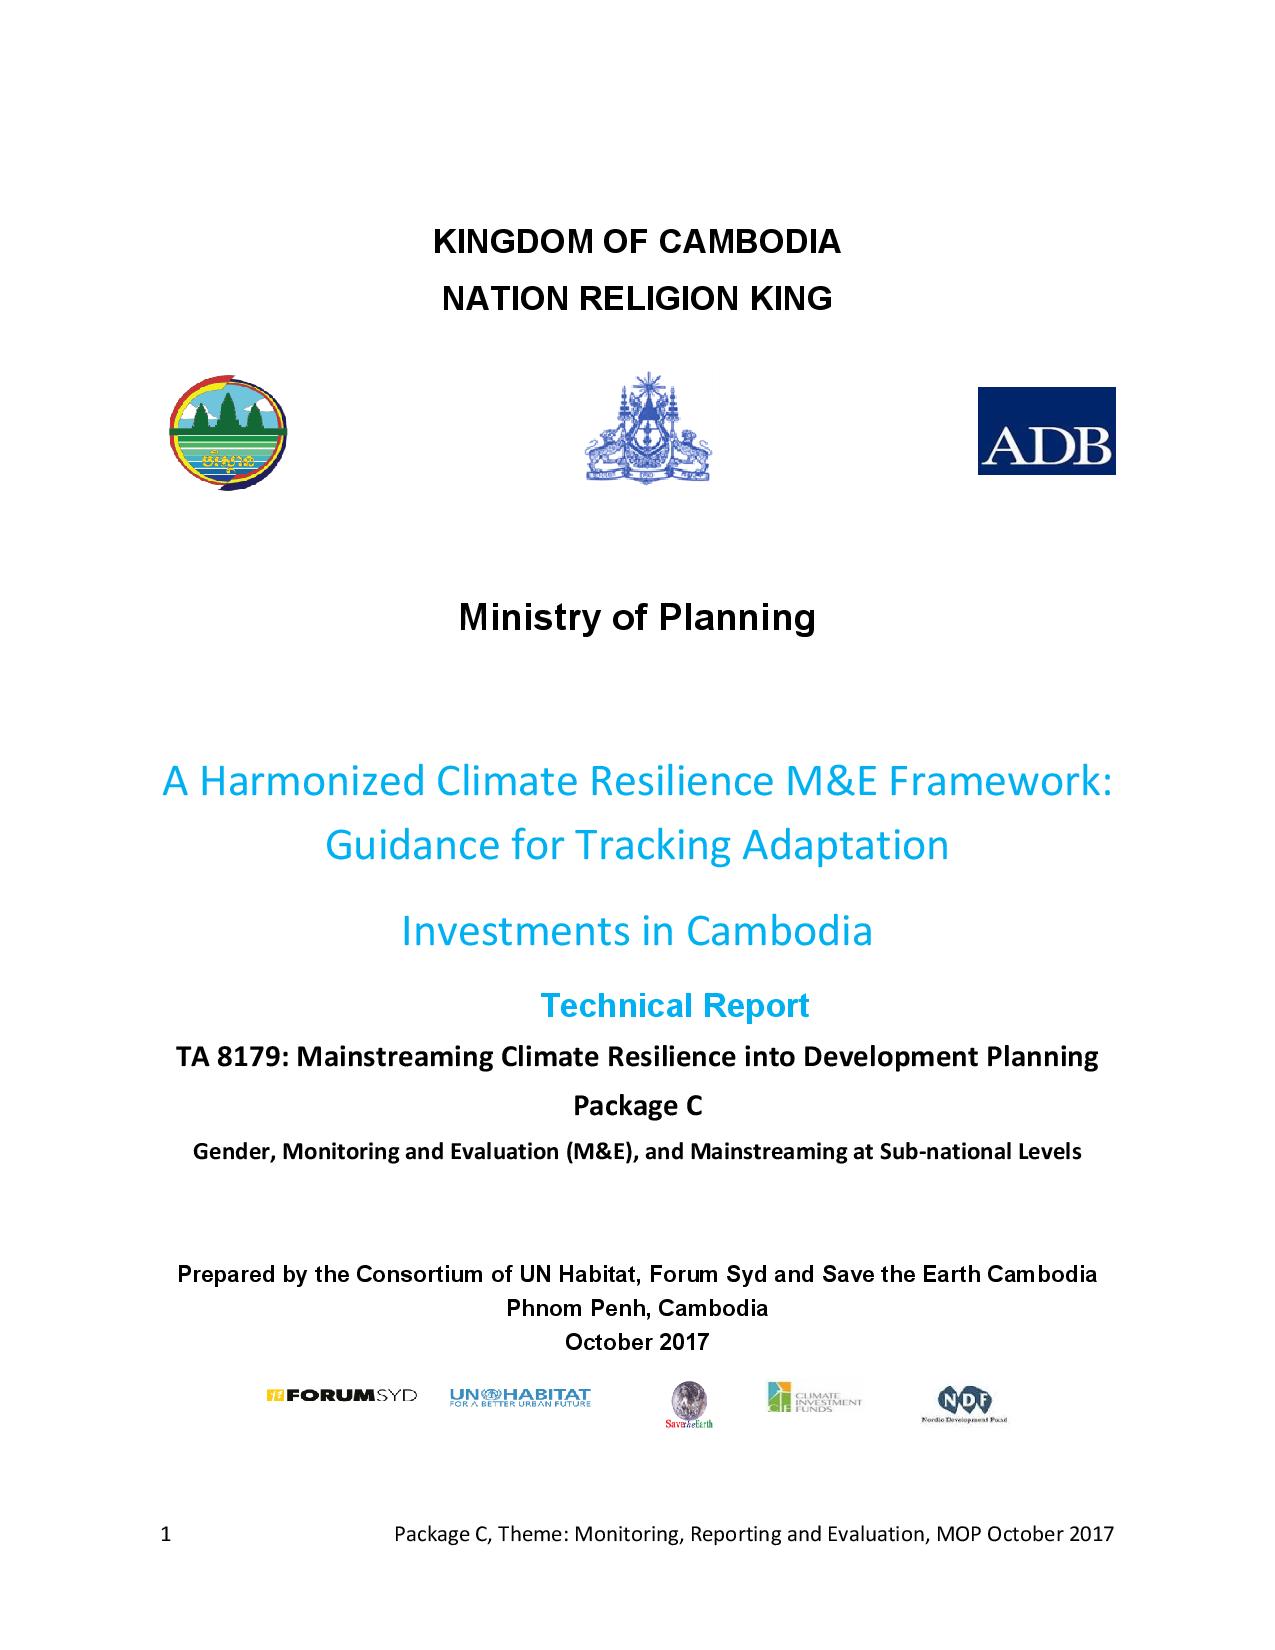 A Harmonized Climate Resilience M&E Framework: Guidance for Tracking Adaptation Investments in Cambodia